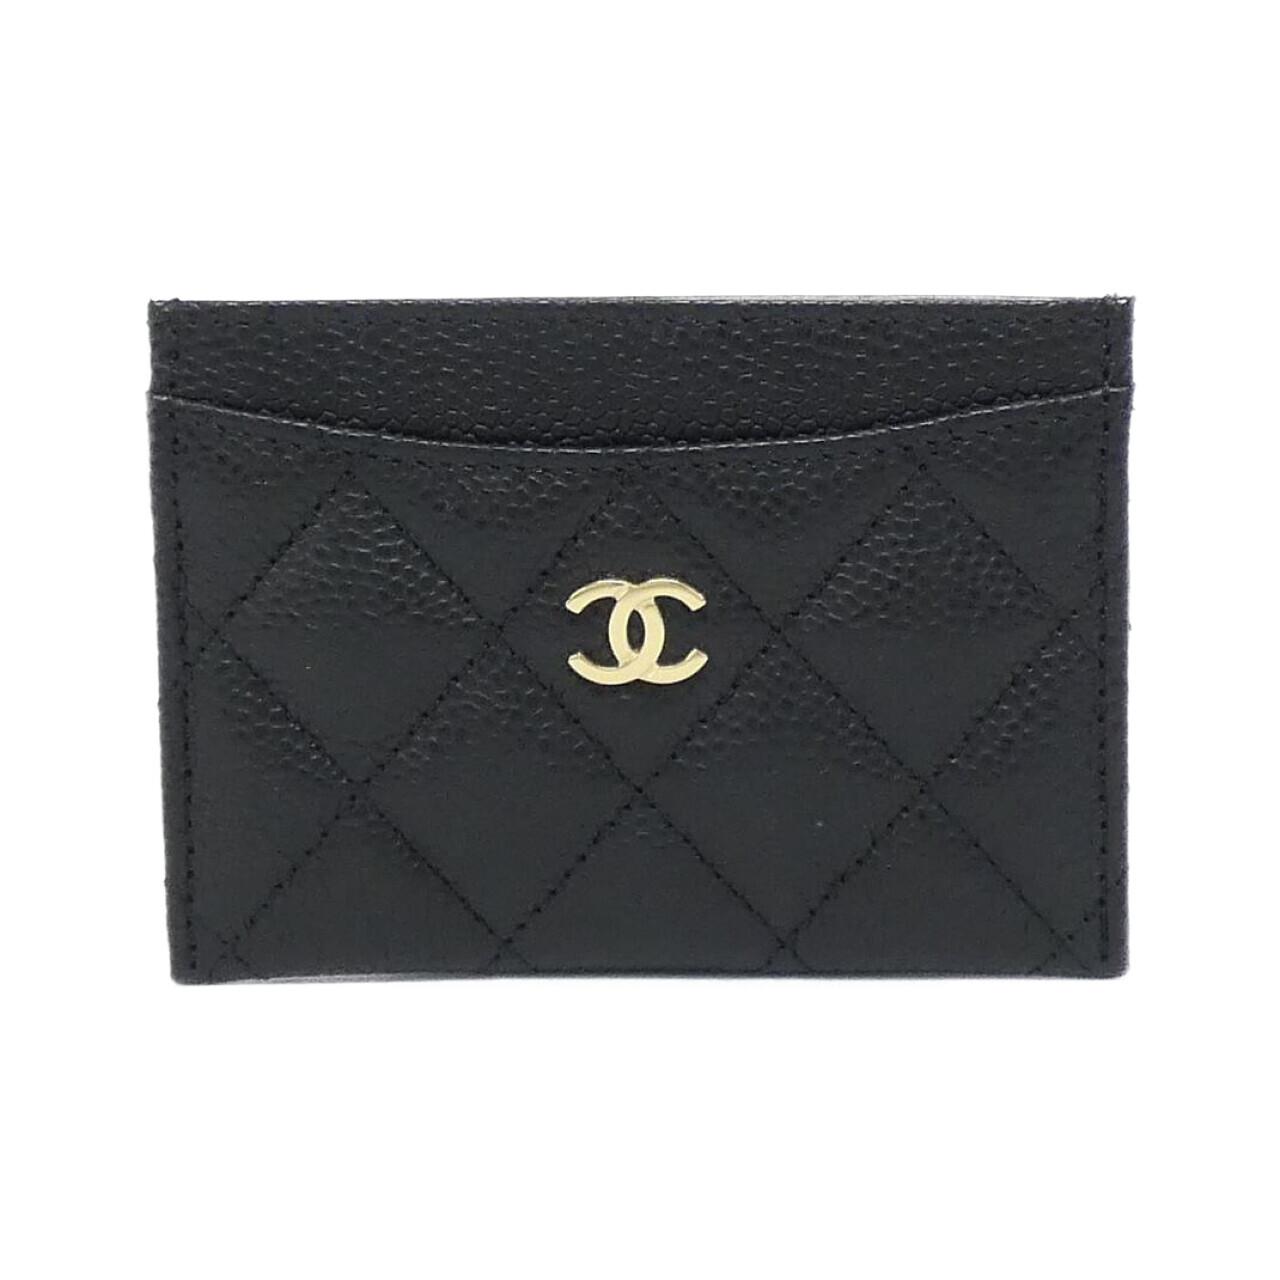 KOMEHYO|[Unused items] CHANEL Timeless Classic Line AP0213 CARD 